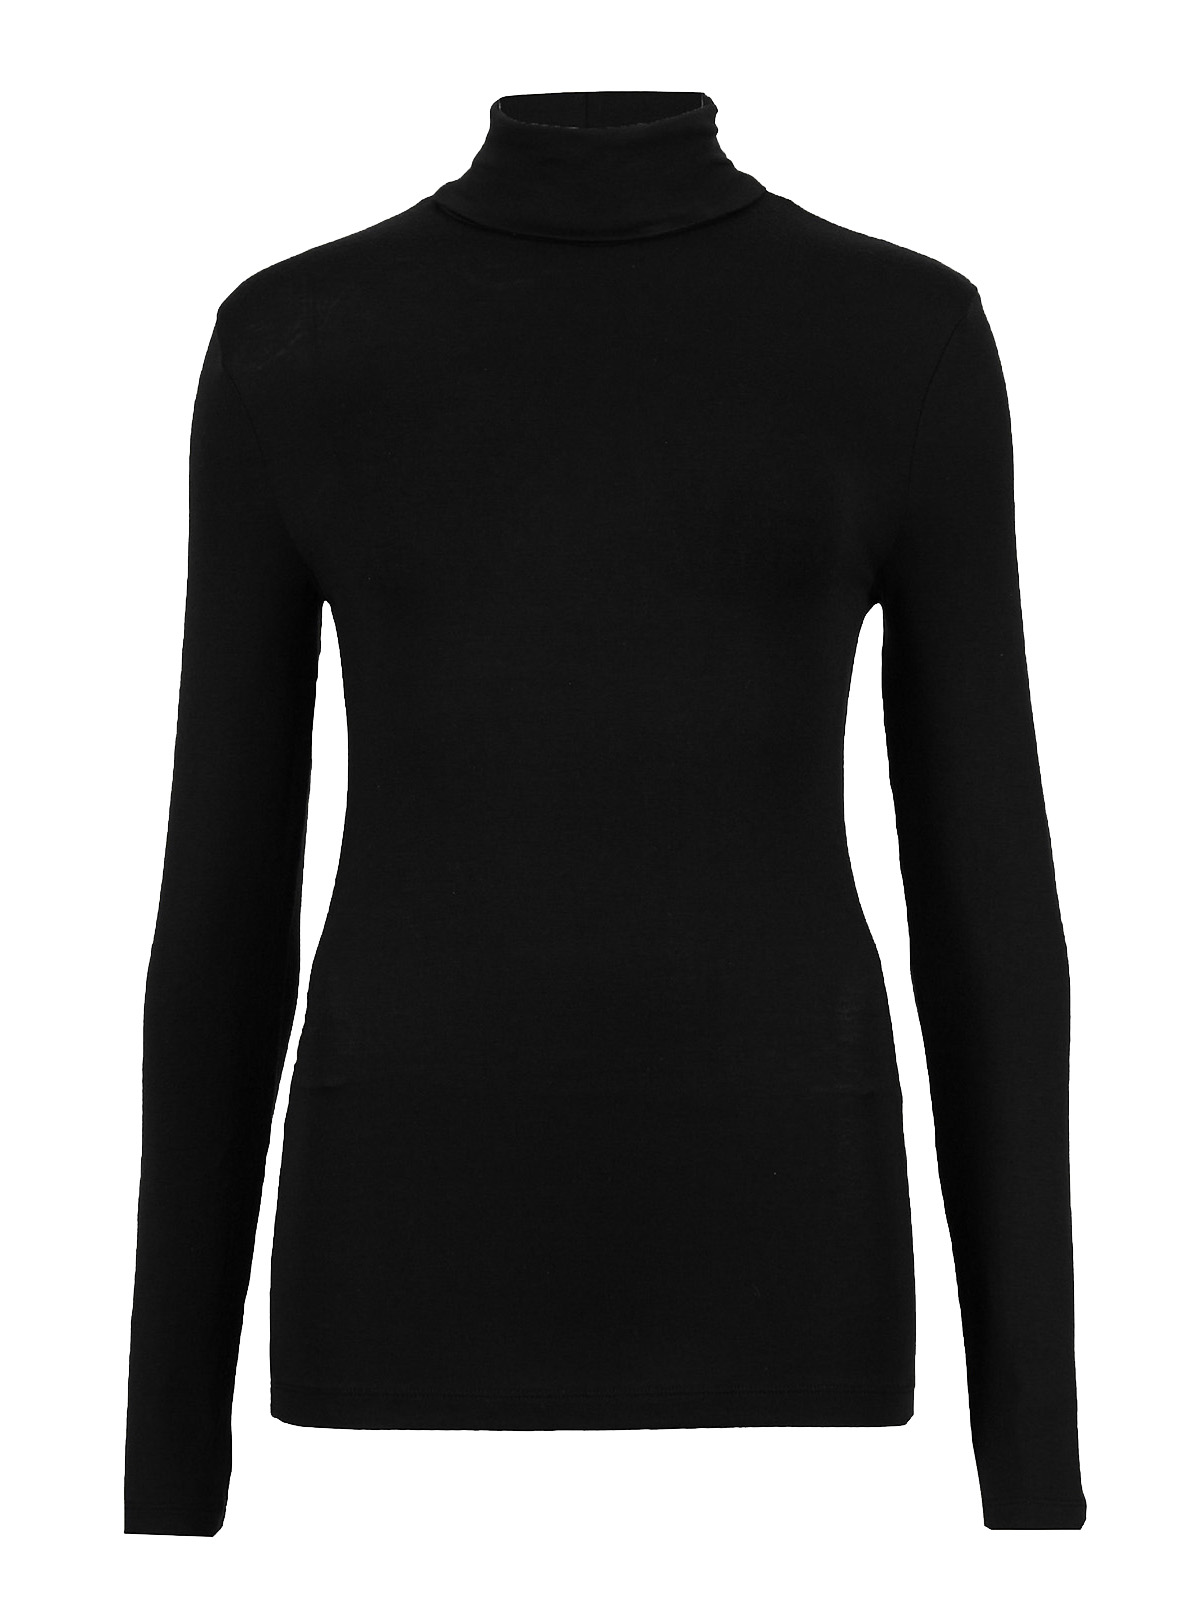 Marks and Spencer - - M&5 BLACK Heatgen Thermal Polo Neck Long Sleeve ...